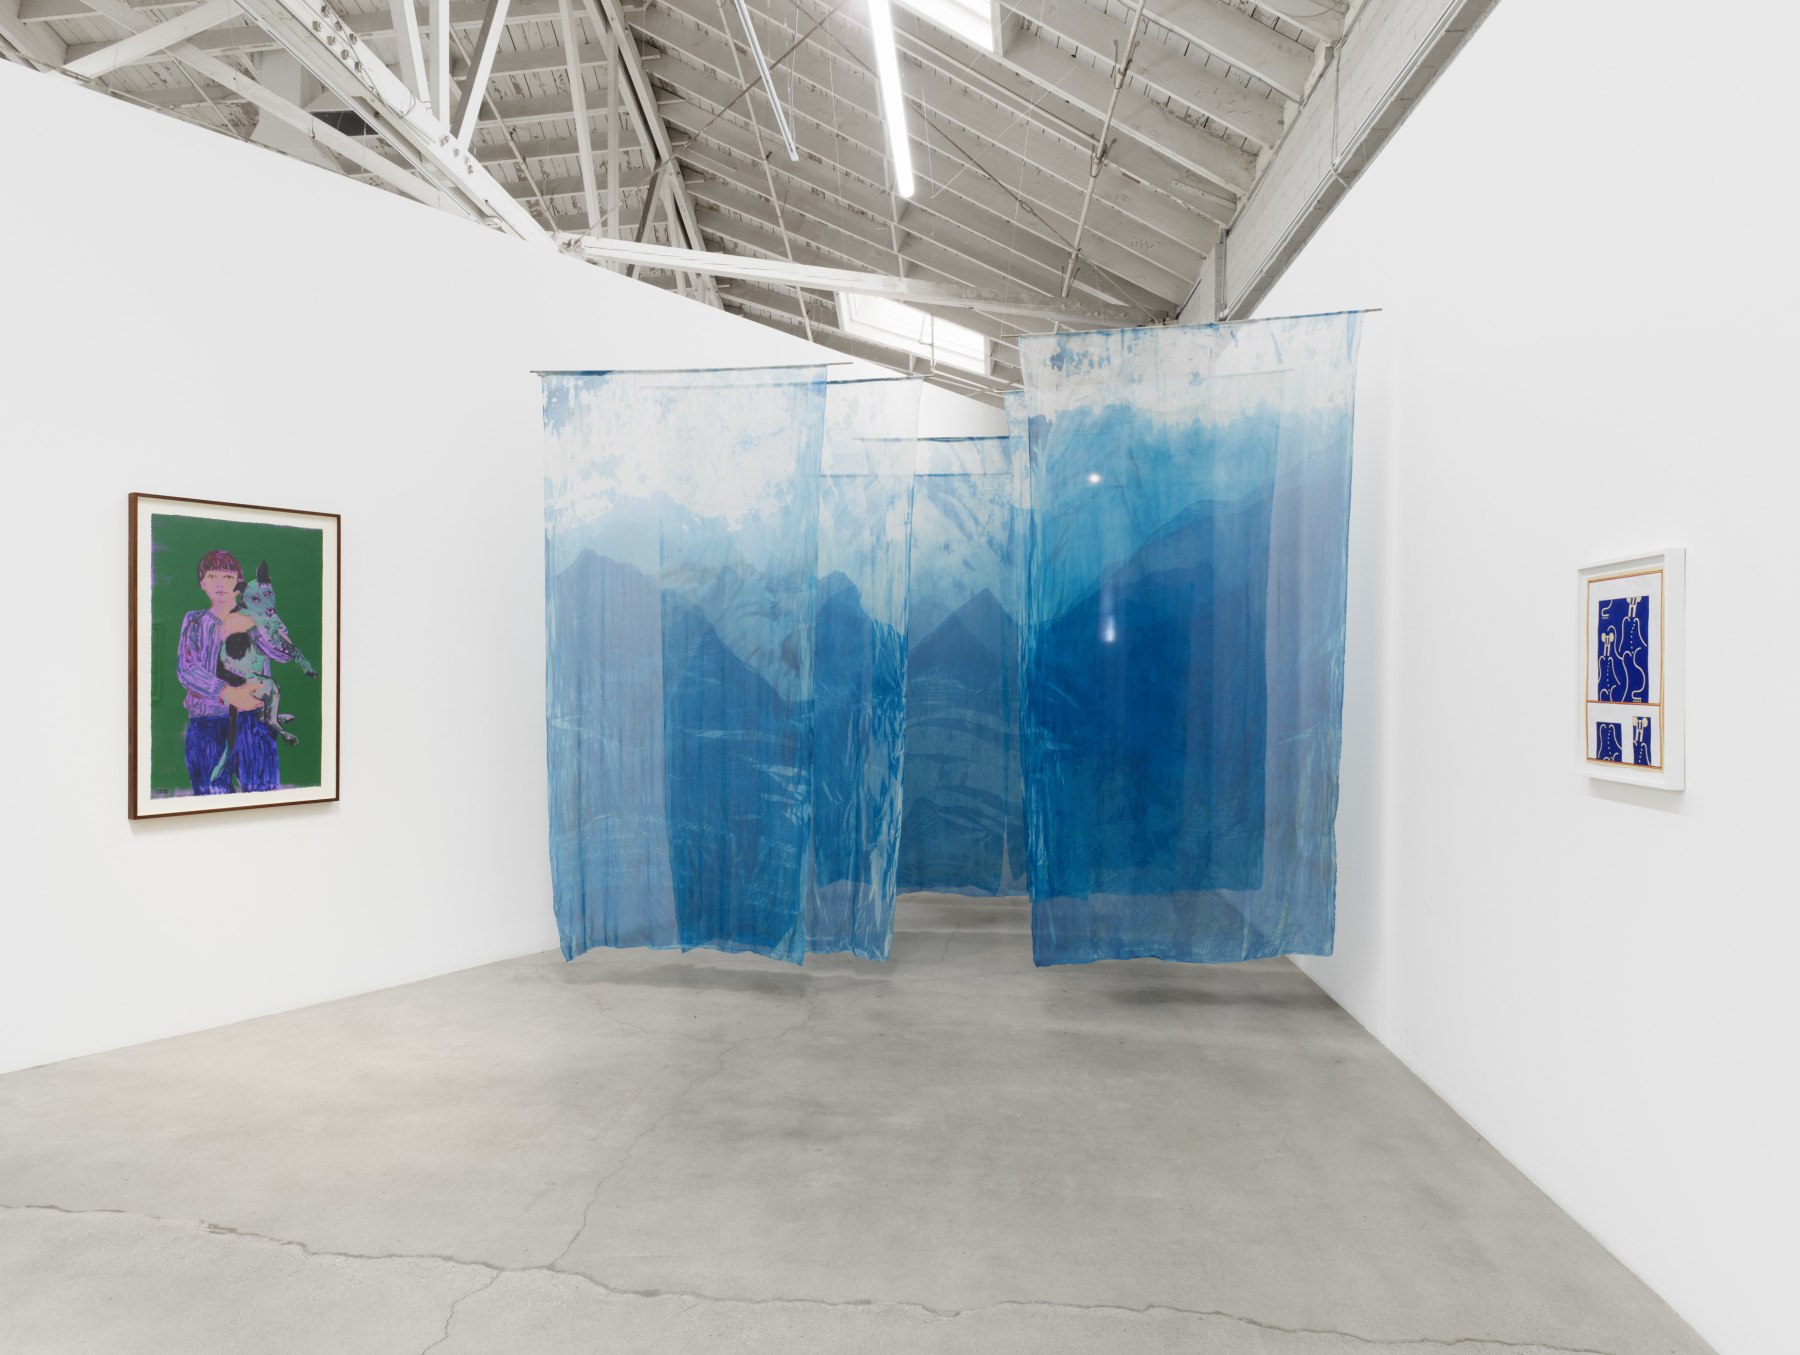 Installation view of Majeure Force, featuring works by Claire Tabouret, Elise Rasmussen, and David Korty. 